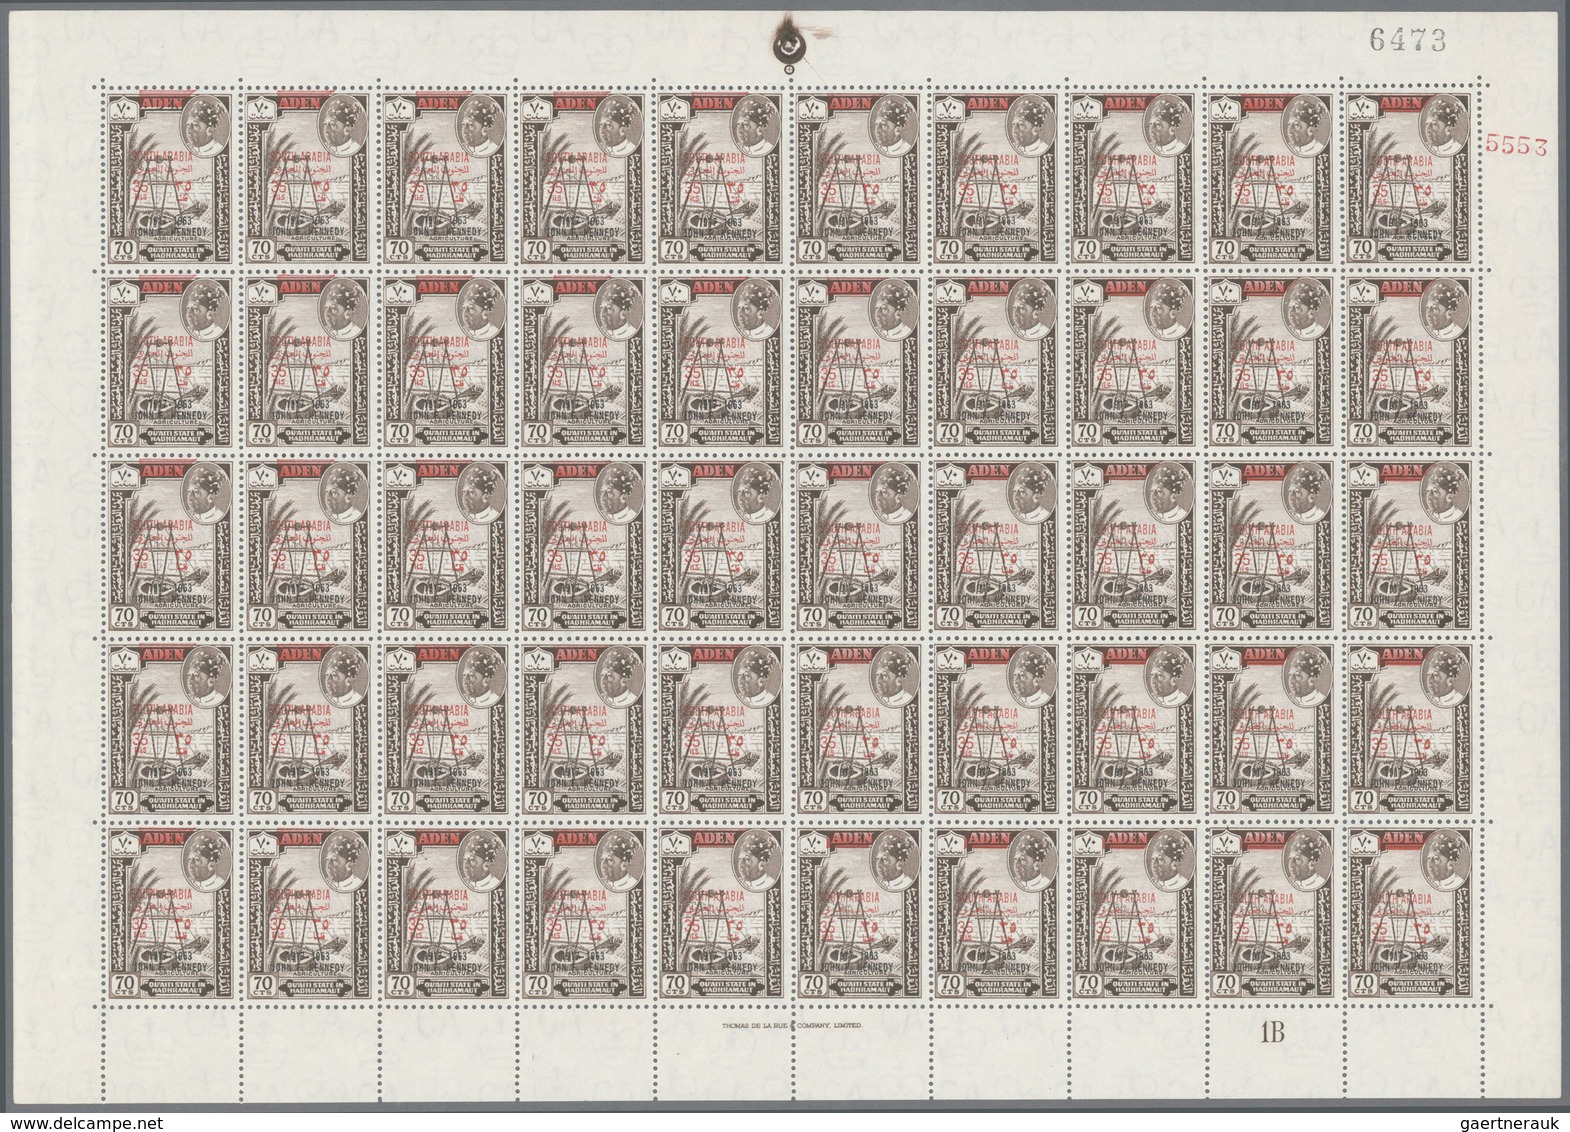 22027 Aden - Qu'aiti State In Hadhramaut: 1966, Definitives With Red Bilingual Opt. 'SOUTH ARABIA' And Add - Jemen